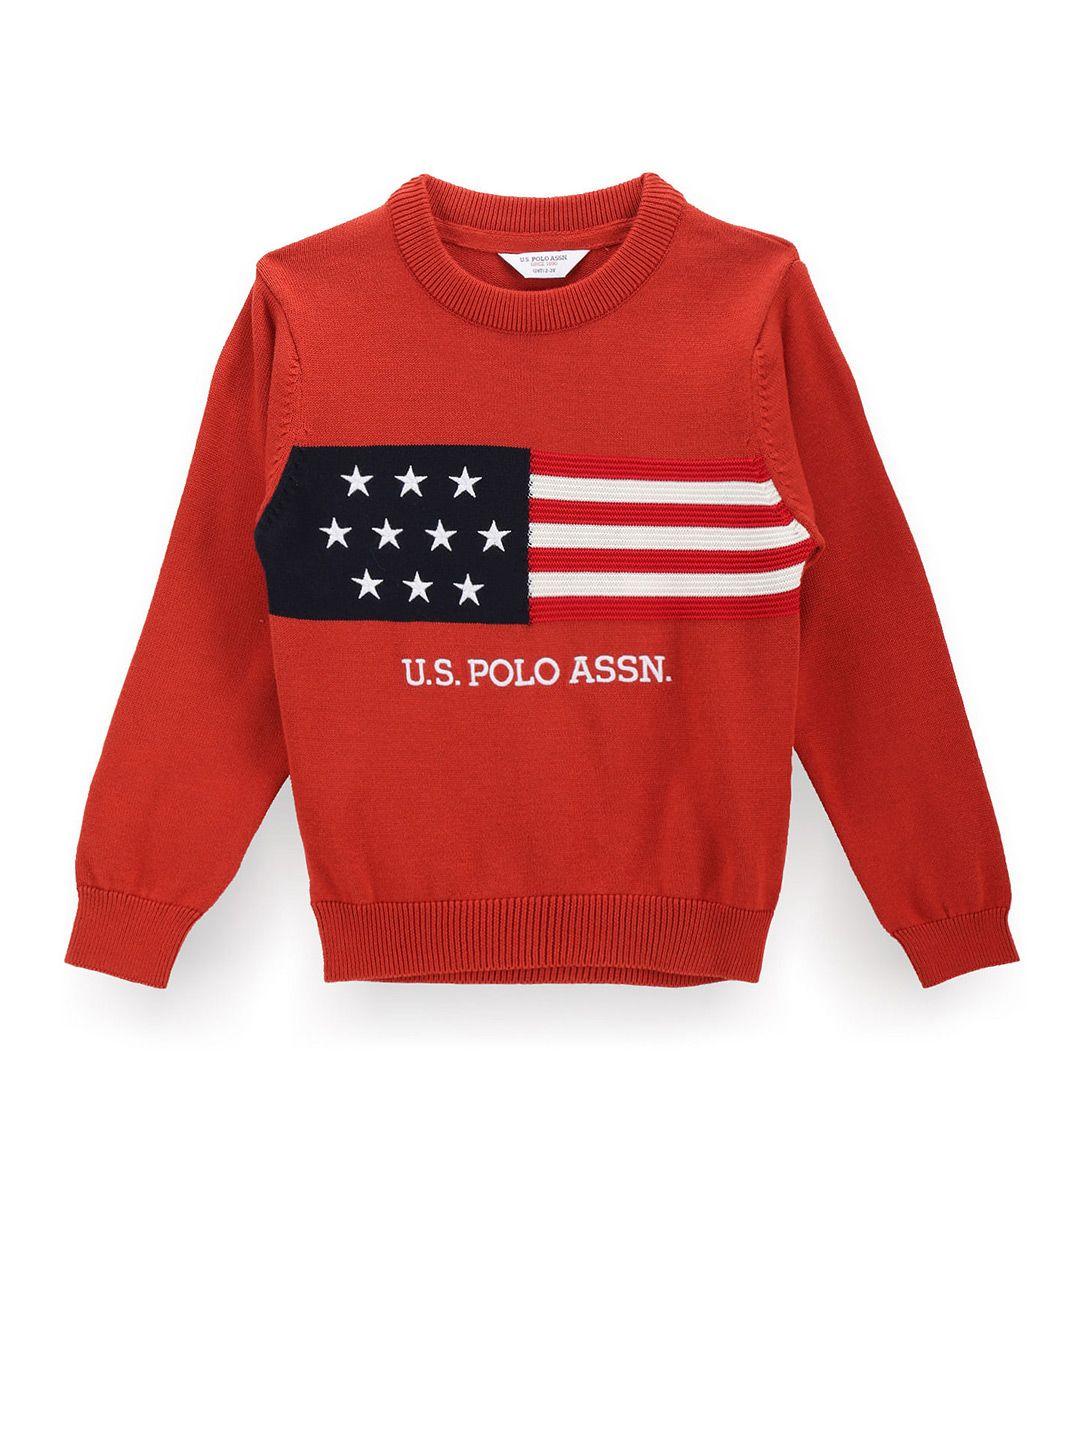 u.s. polo assn. kids boys printed pure cotton pullover sweater